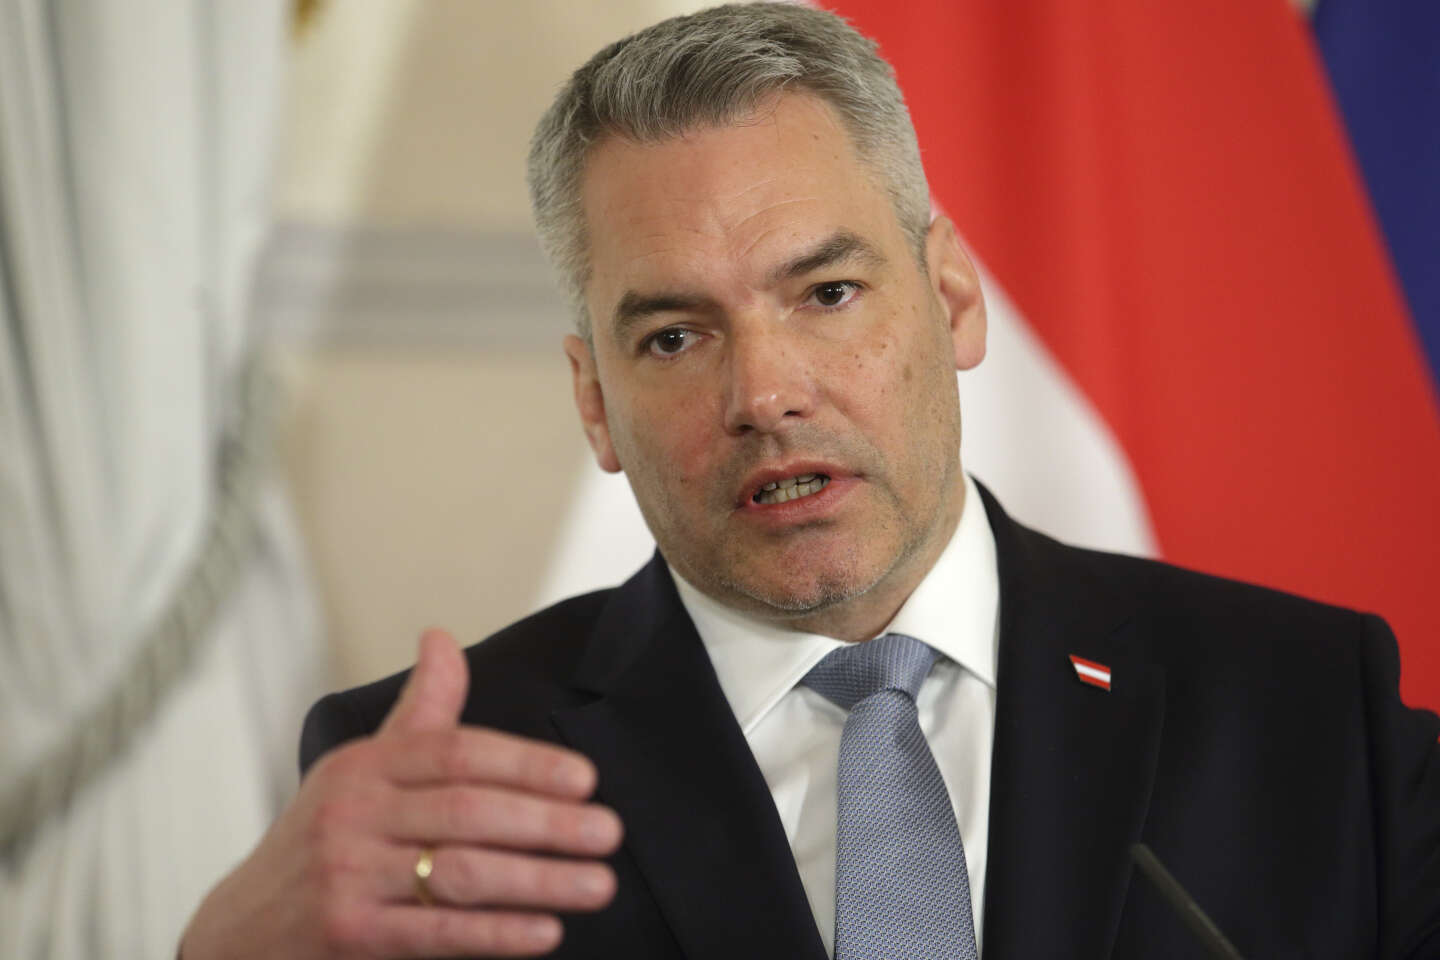 Austria rocked by massive Russian spying scandal